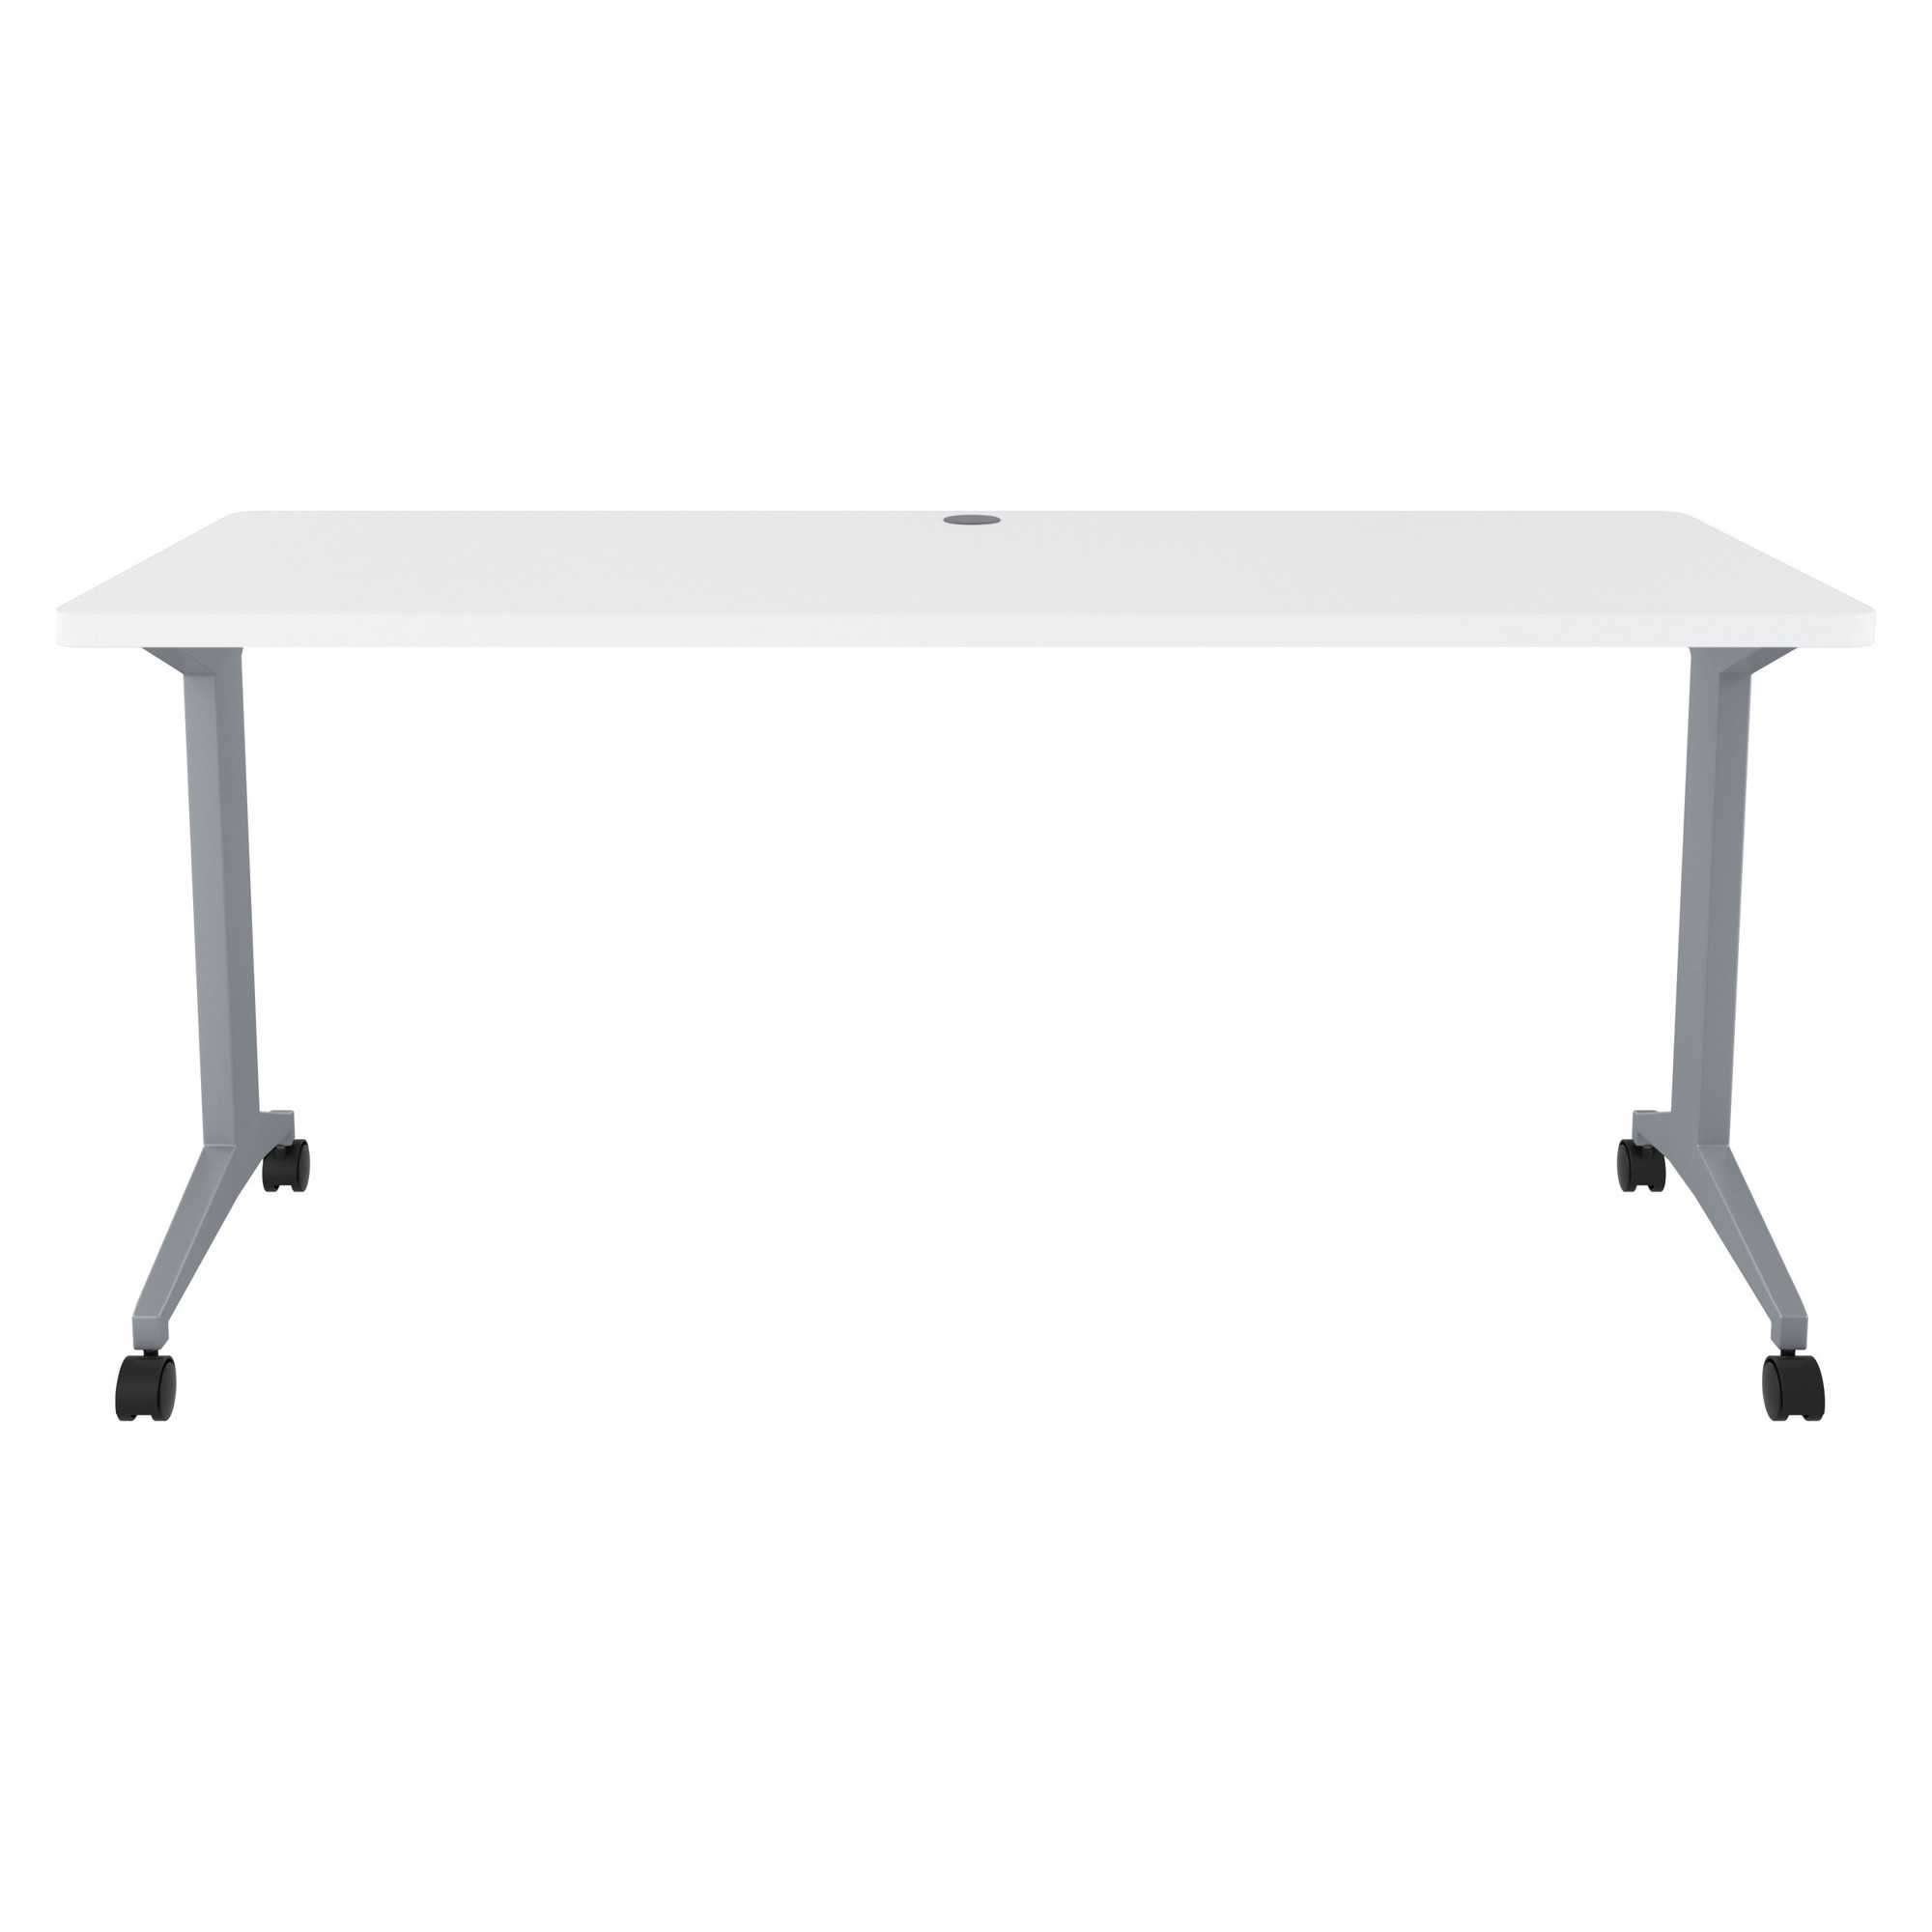 Hirsh Industries, T-Leg Table Desk with Rounded Corner T-Mold Top, Width 60 in, Height 28.75 in, Depth 24 in, Model 24373